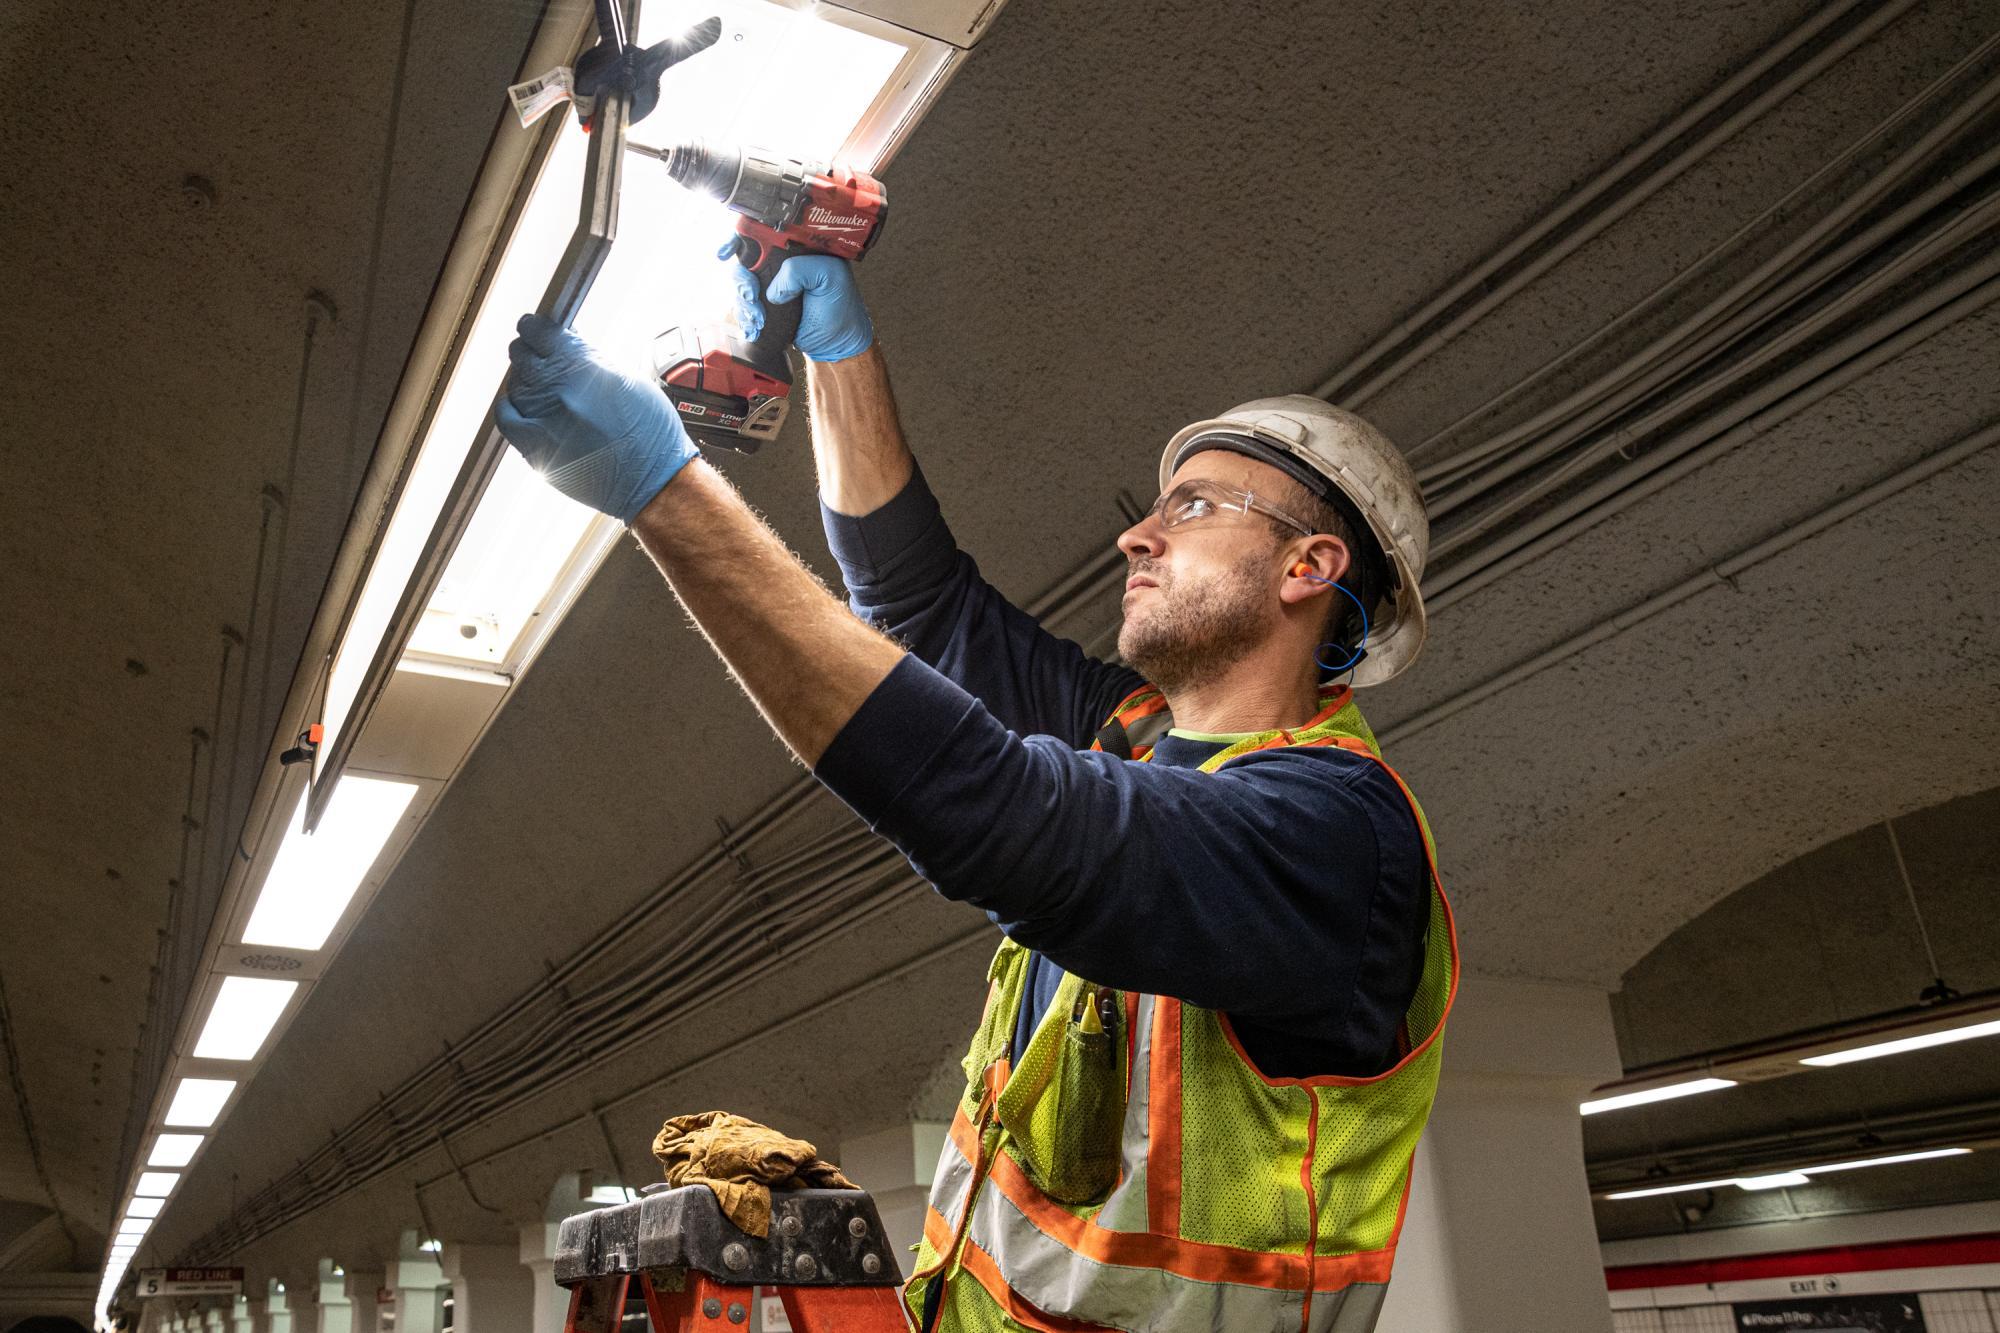 A crew member replaces a light fixture at Downtown Crossing as part of the Red Line beautifucation and track work during the November 15 – 17 weekend shutdown